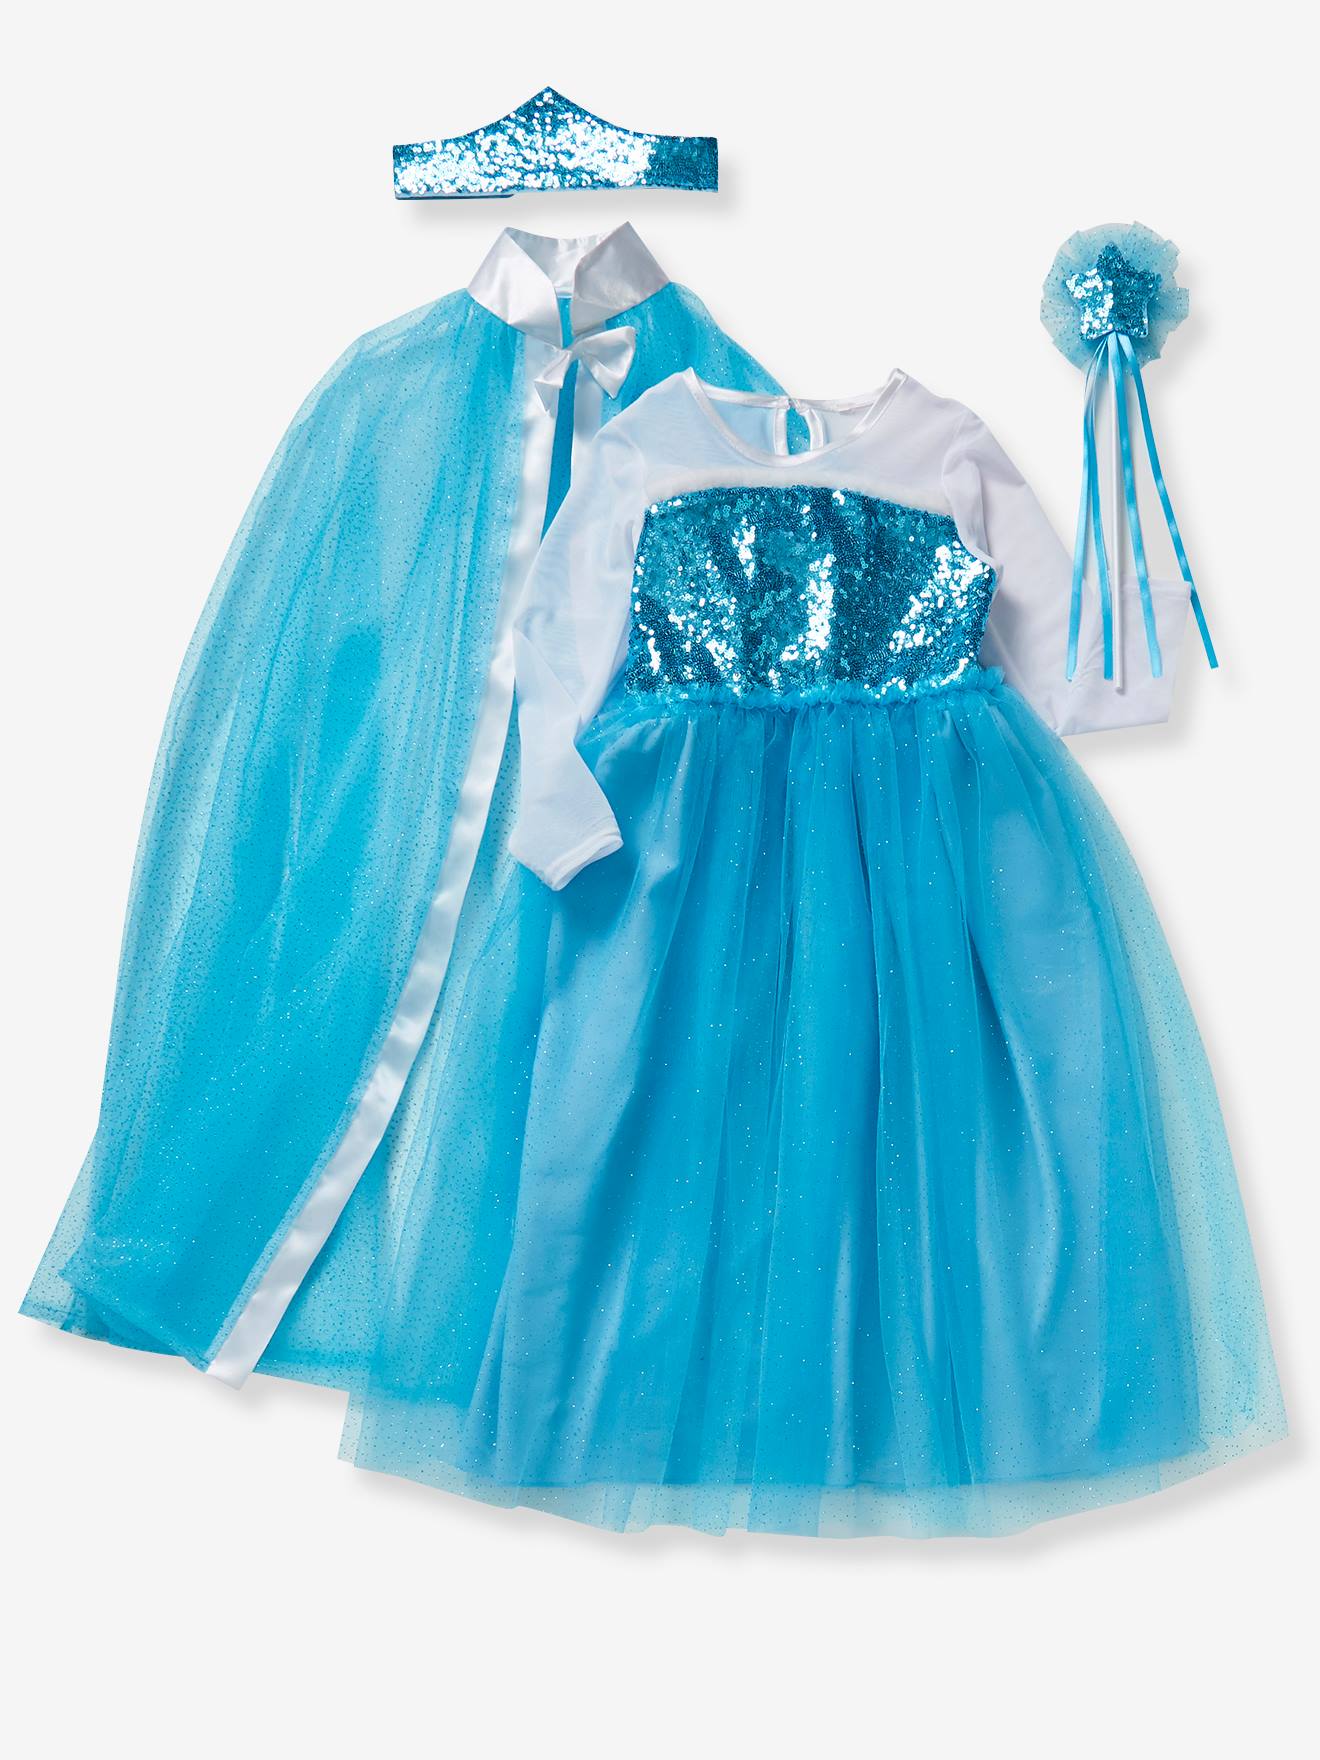 Princess Costume with Cape, Wand & Crown blue